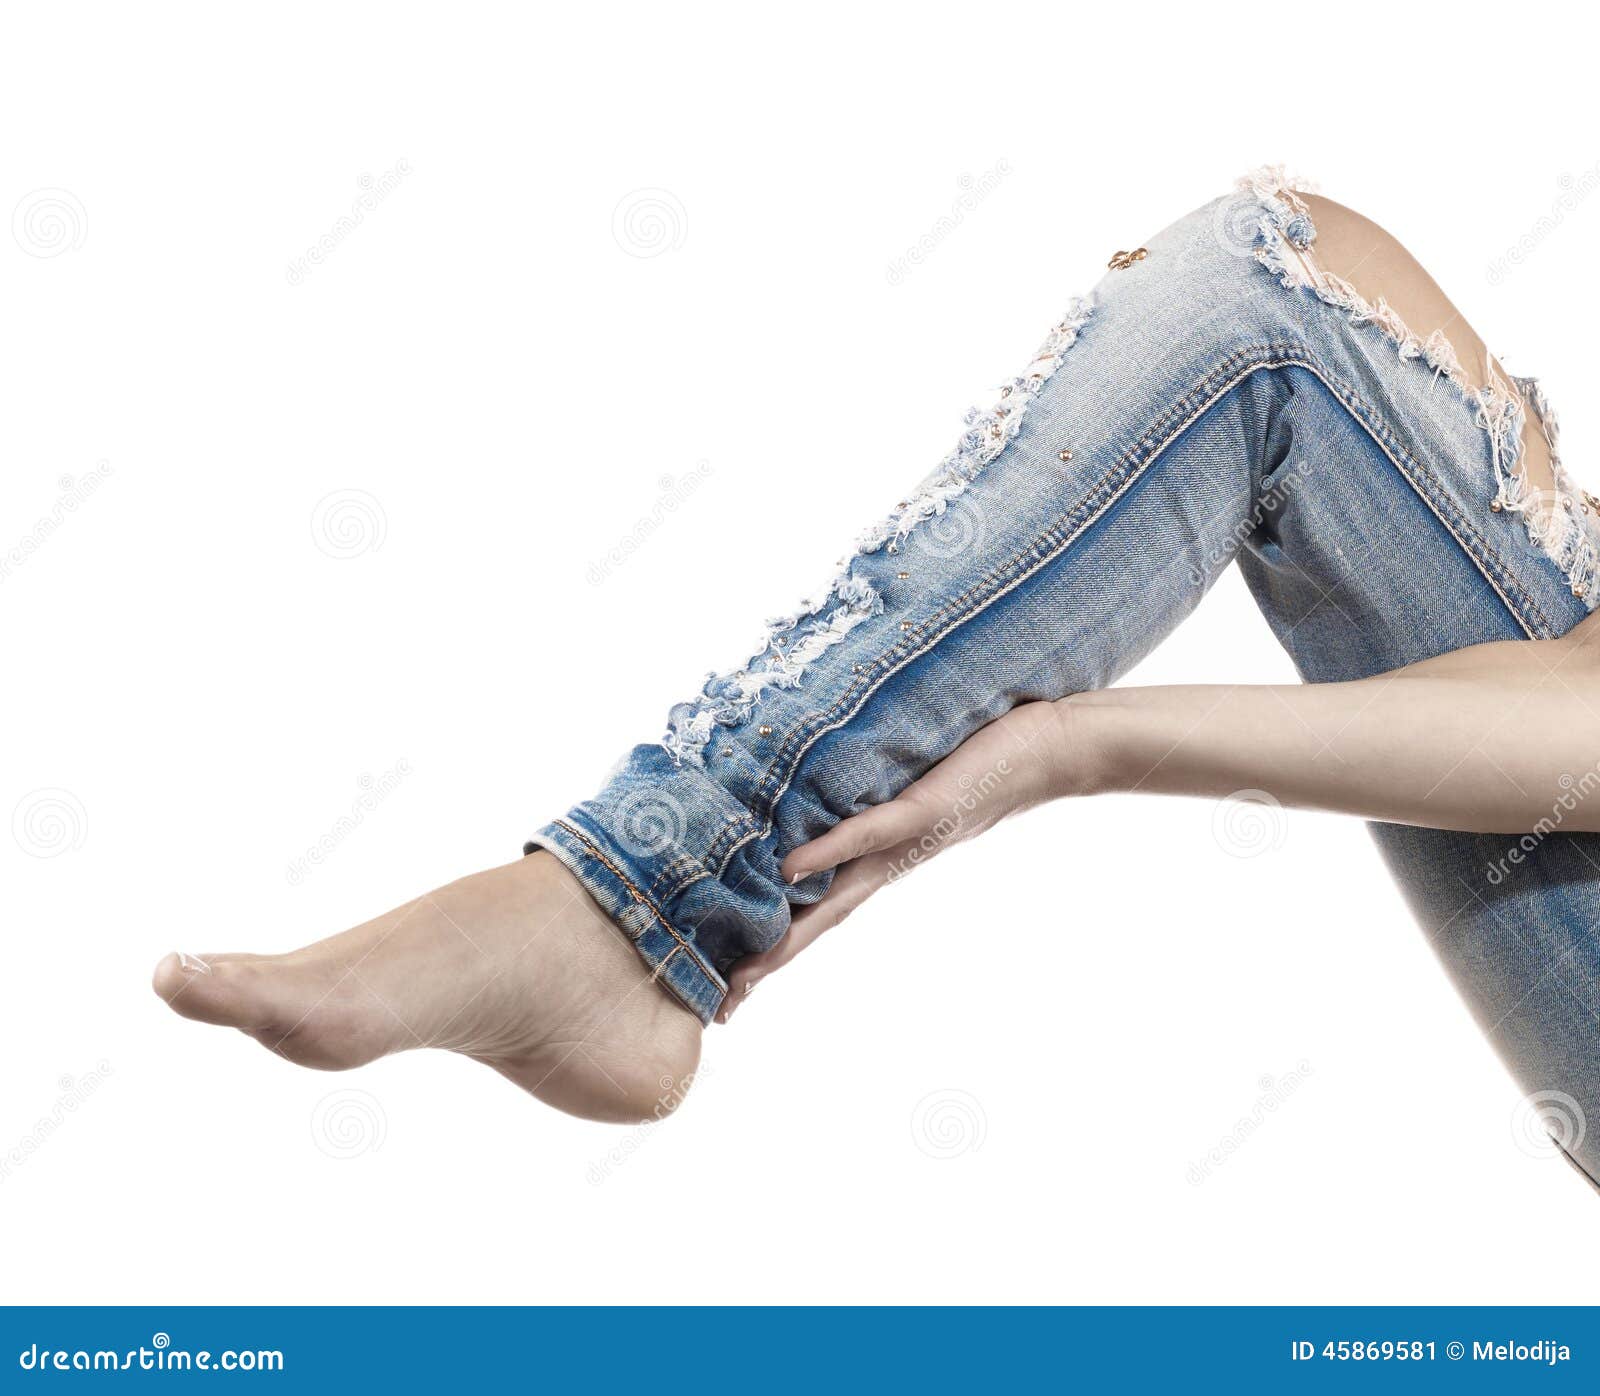 Woman Massaging Her Calves - Anatomy Muscles. Stock Image - Image of ...